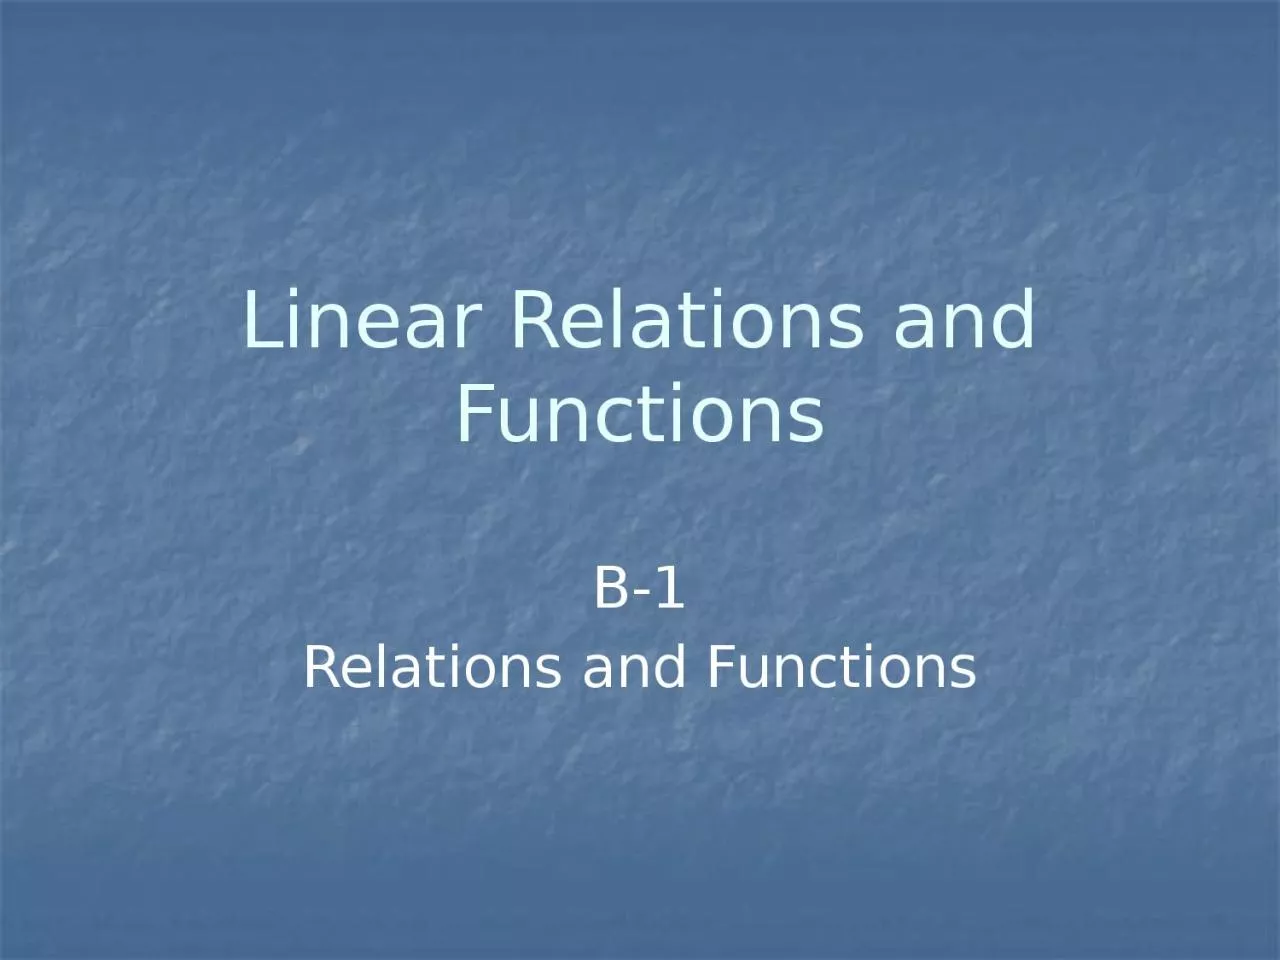 Linear Relations and Functions